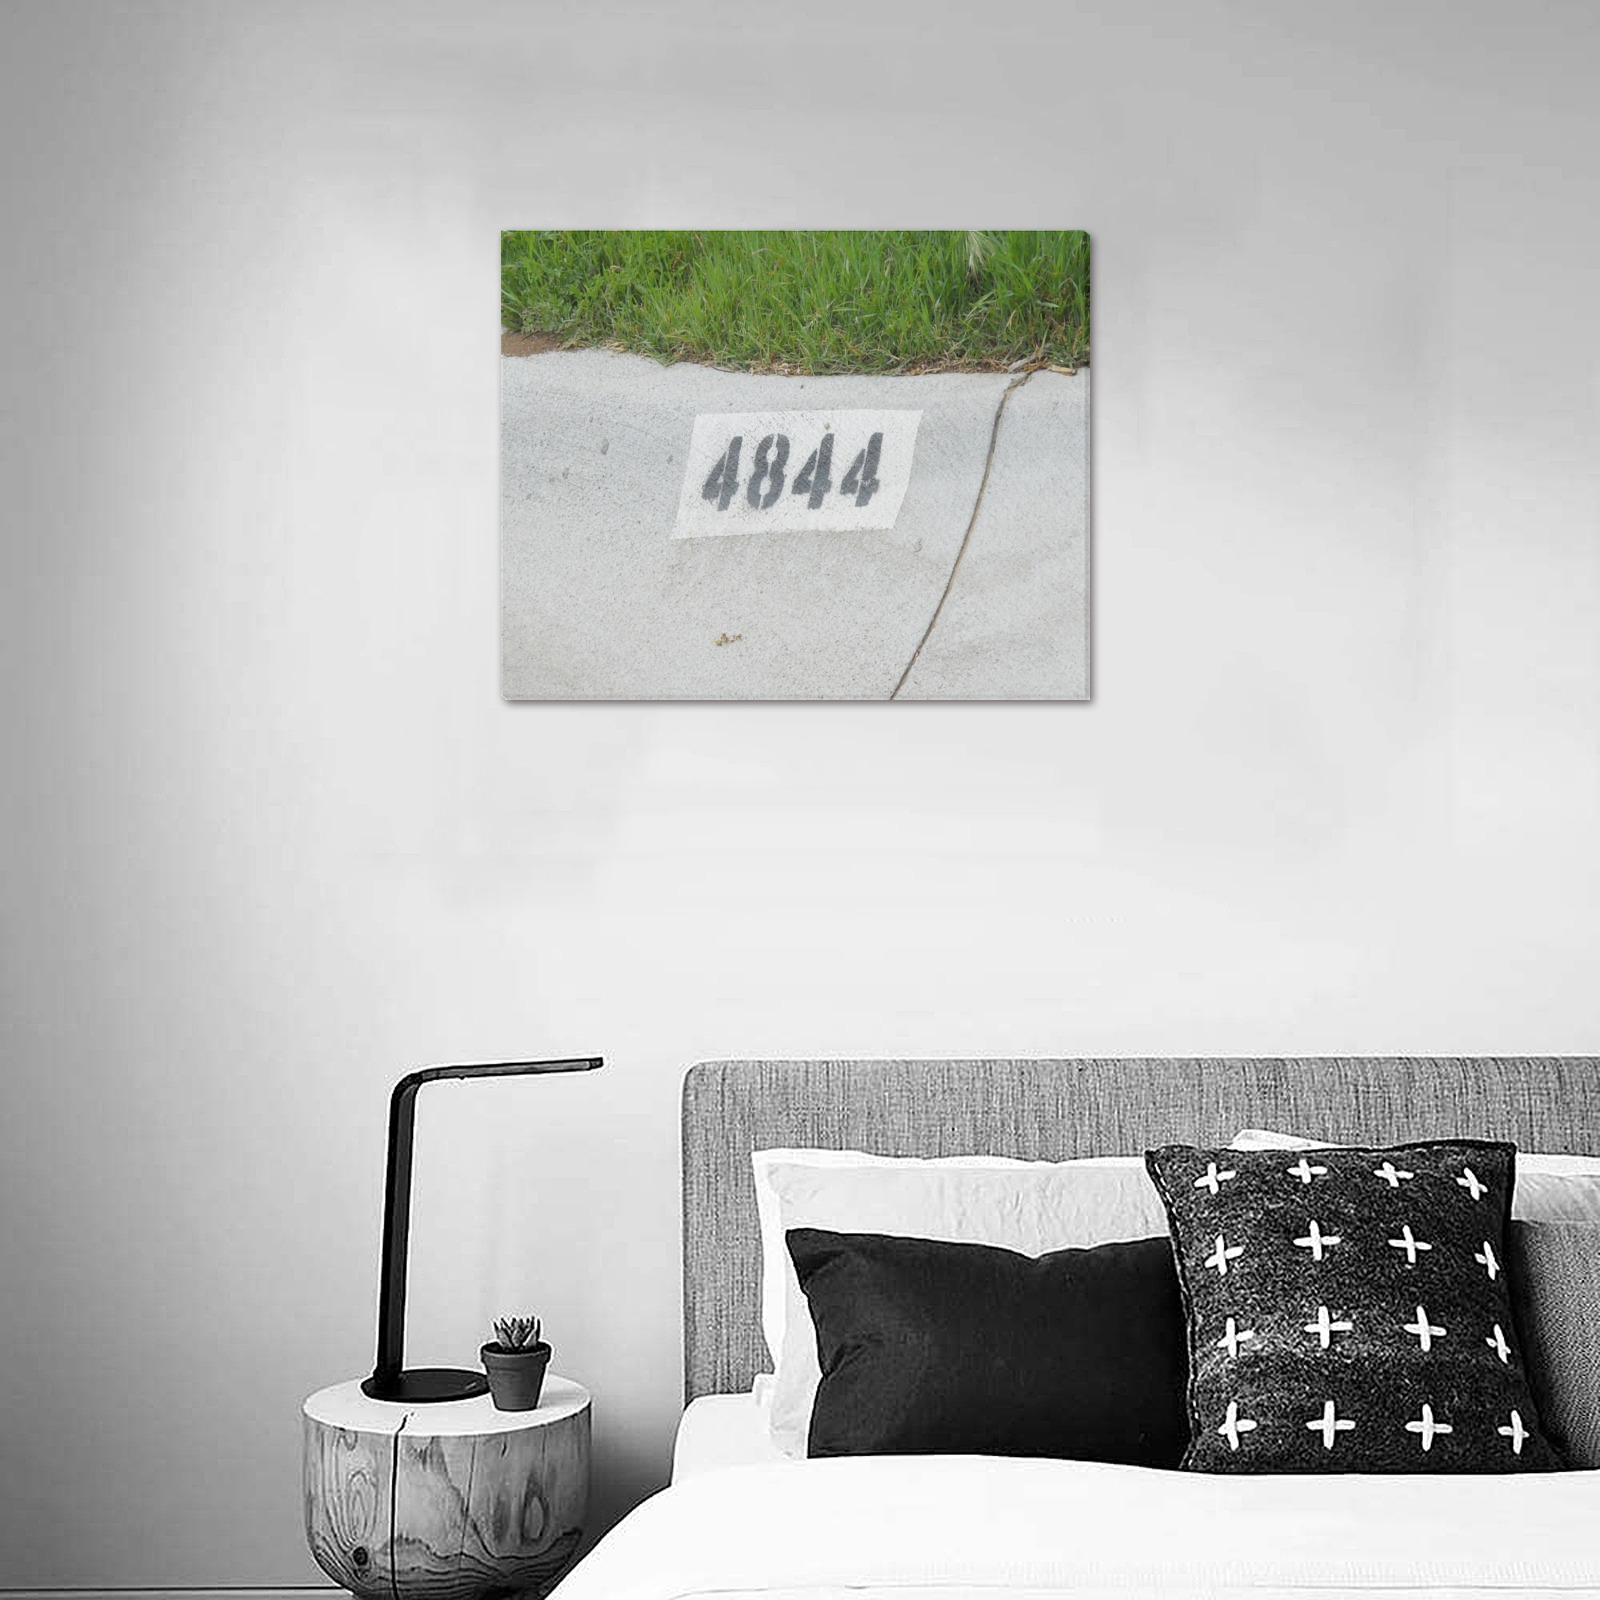 Street Number 4844 Upgraded Canvas Print 20"x16"